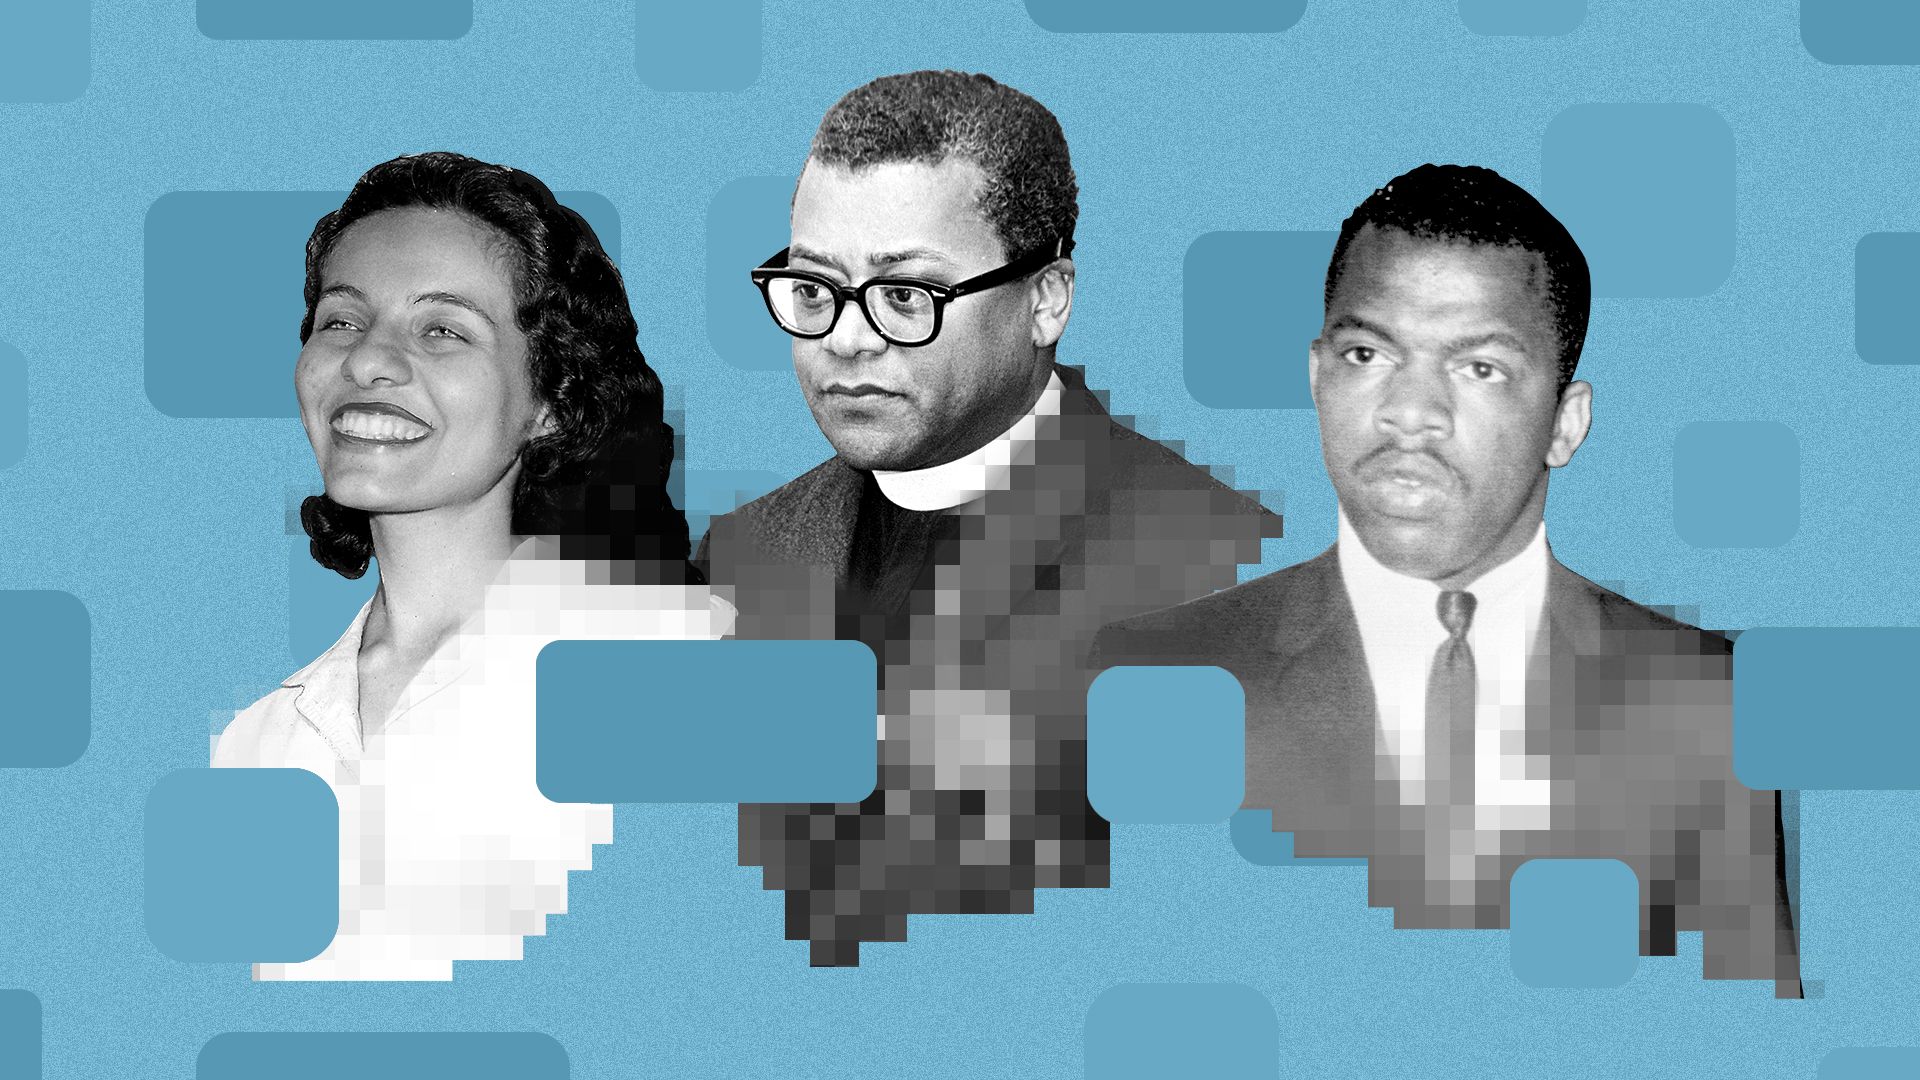 Photo illustration of a collage featuring Diane Nash, James Lawson and John Lewis, partially pixelated and over a pattern of smart phone and app shapes.